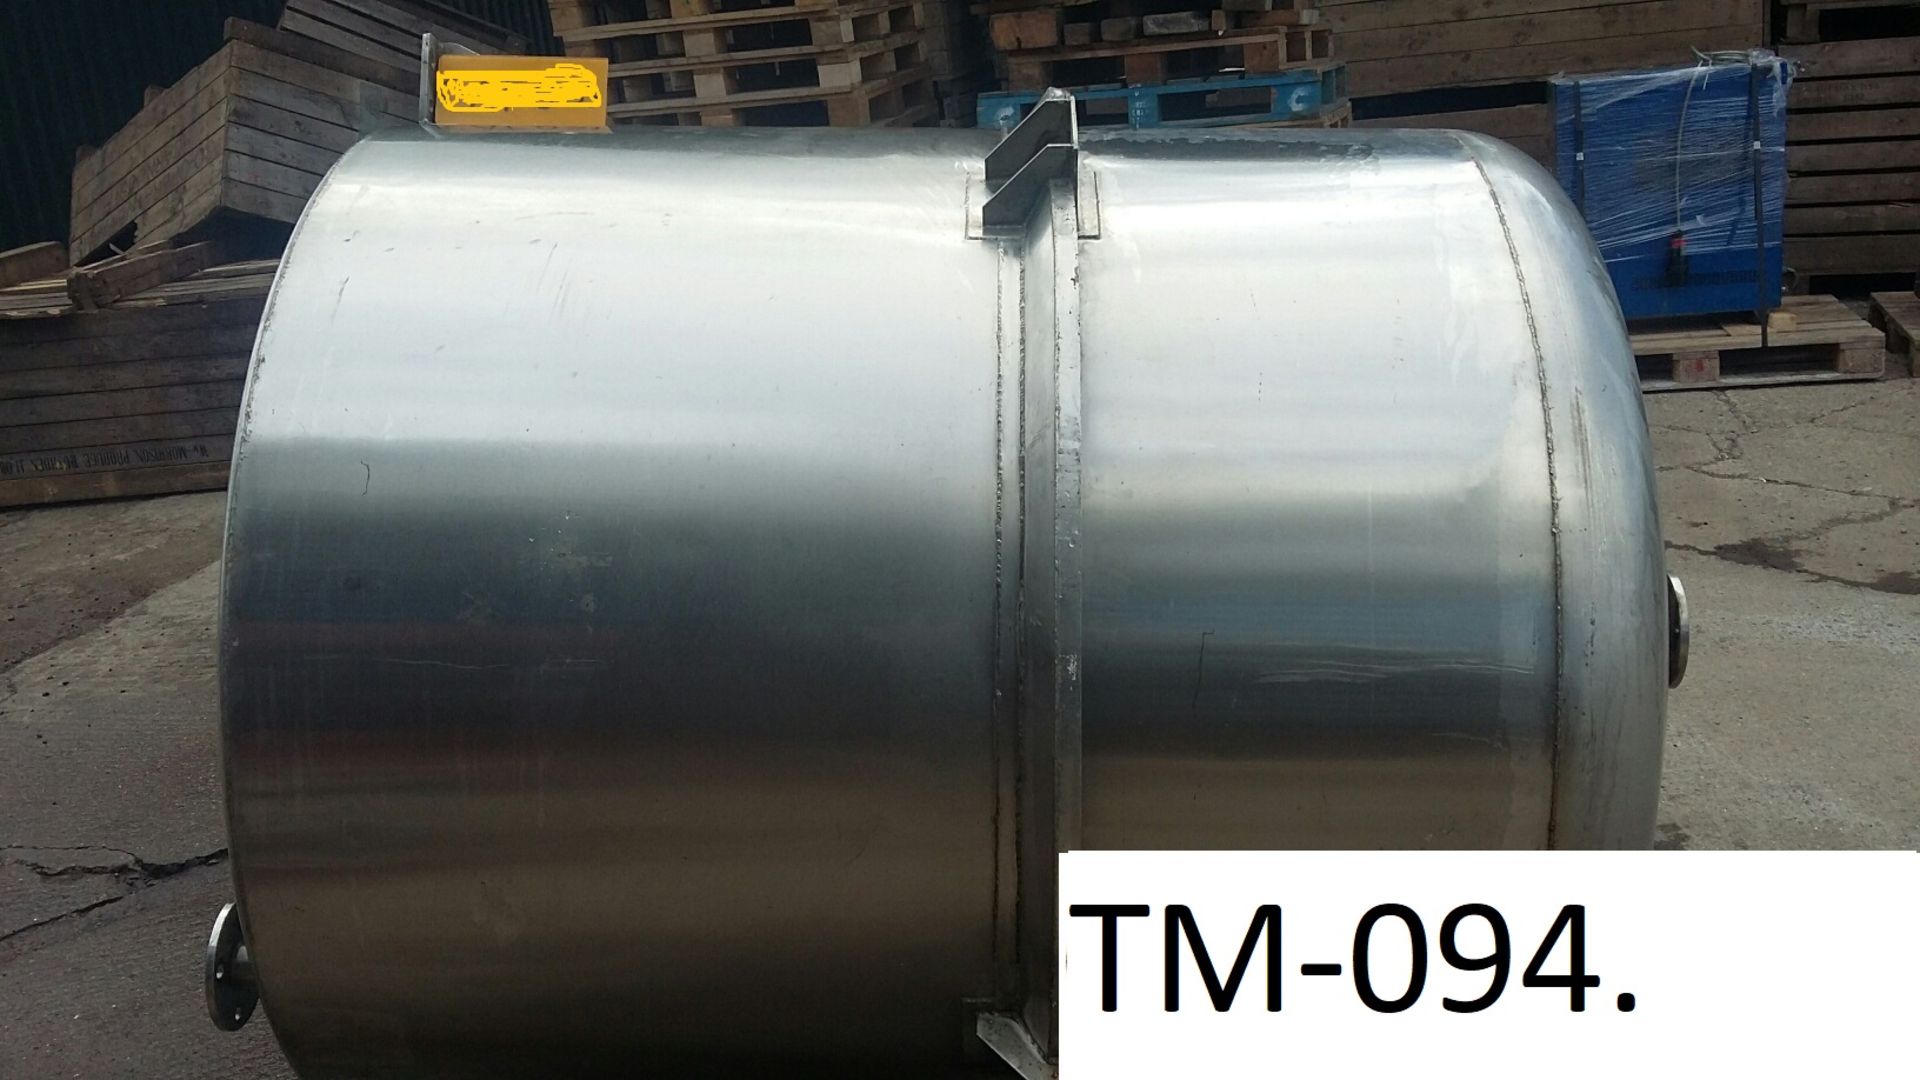 Stainless Steel 2000L Single Skin Vessel, with sid - Image 3 of 3